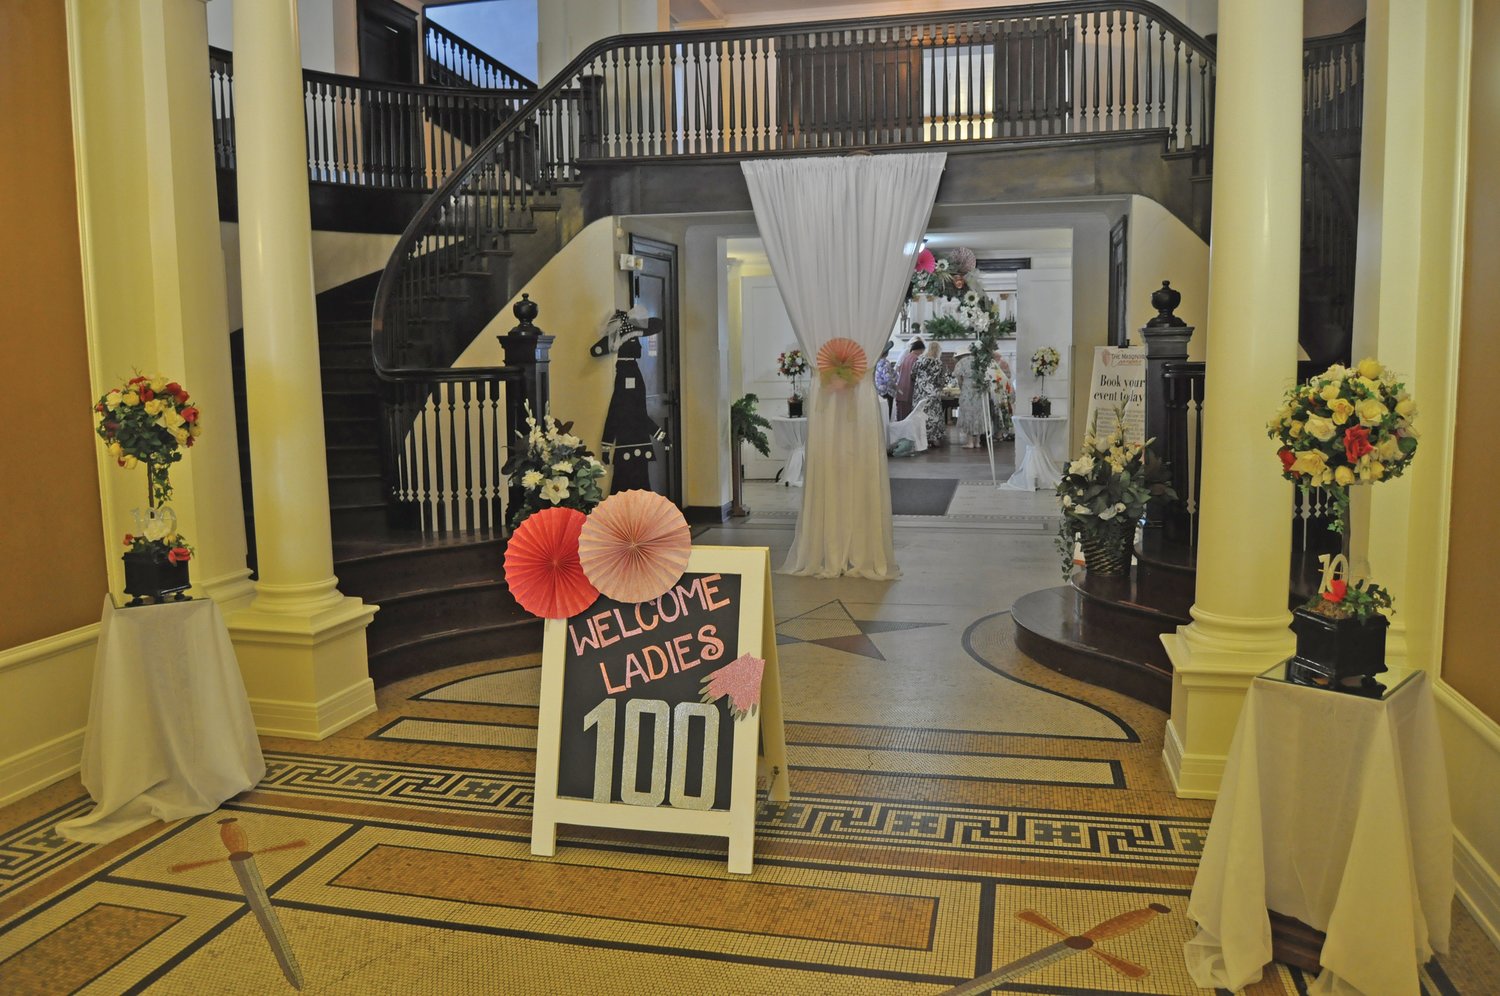 The Masonic Cornerstone Grand Hall and Event Center was decorated for the 100th anniversary celebration of the Flower Lovers Garden Club.